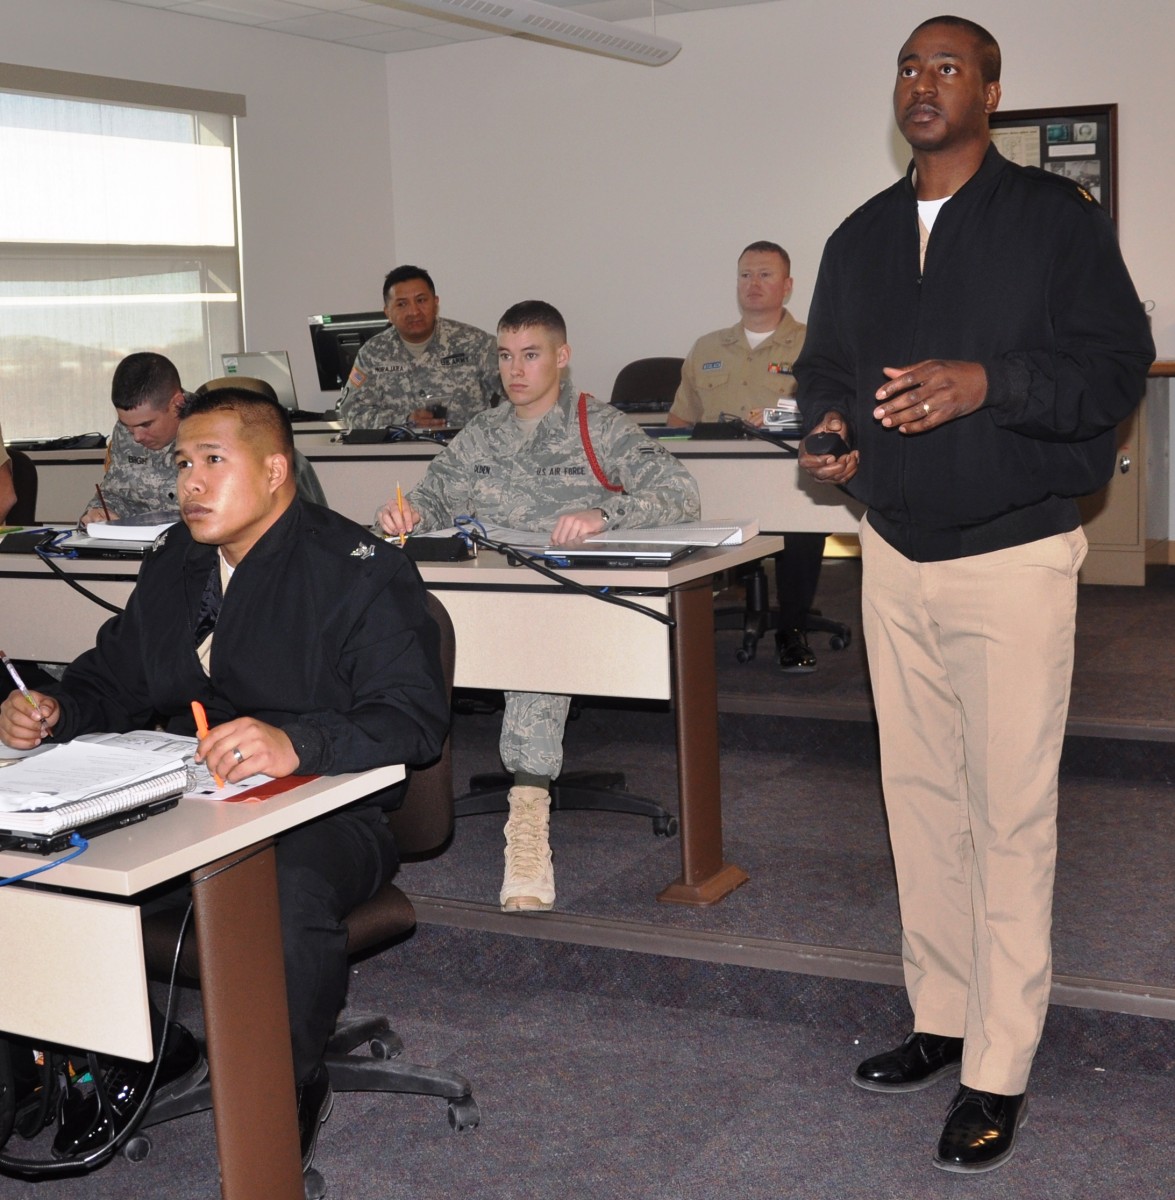 METC: Doing great things | Article | The United States Army